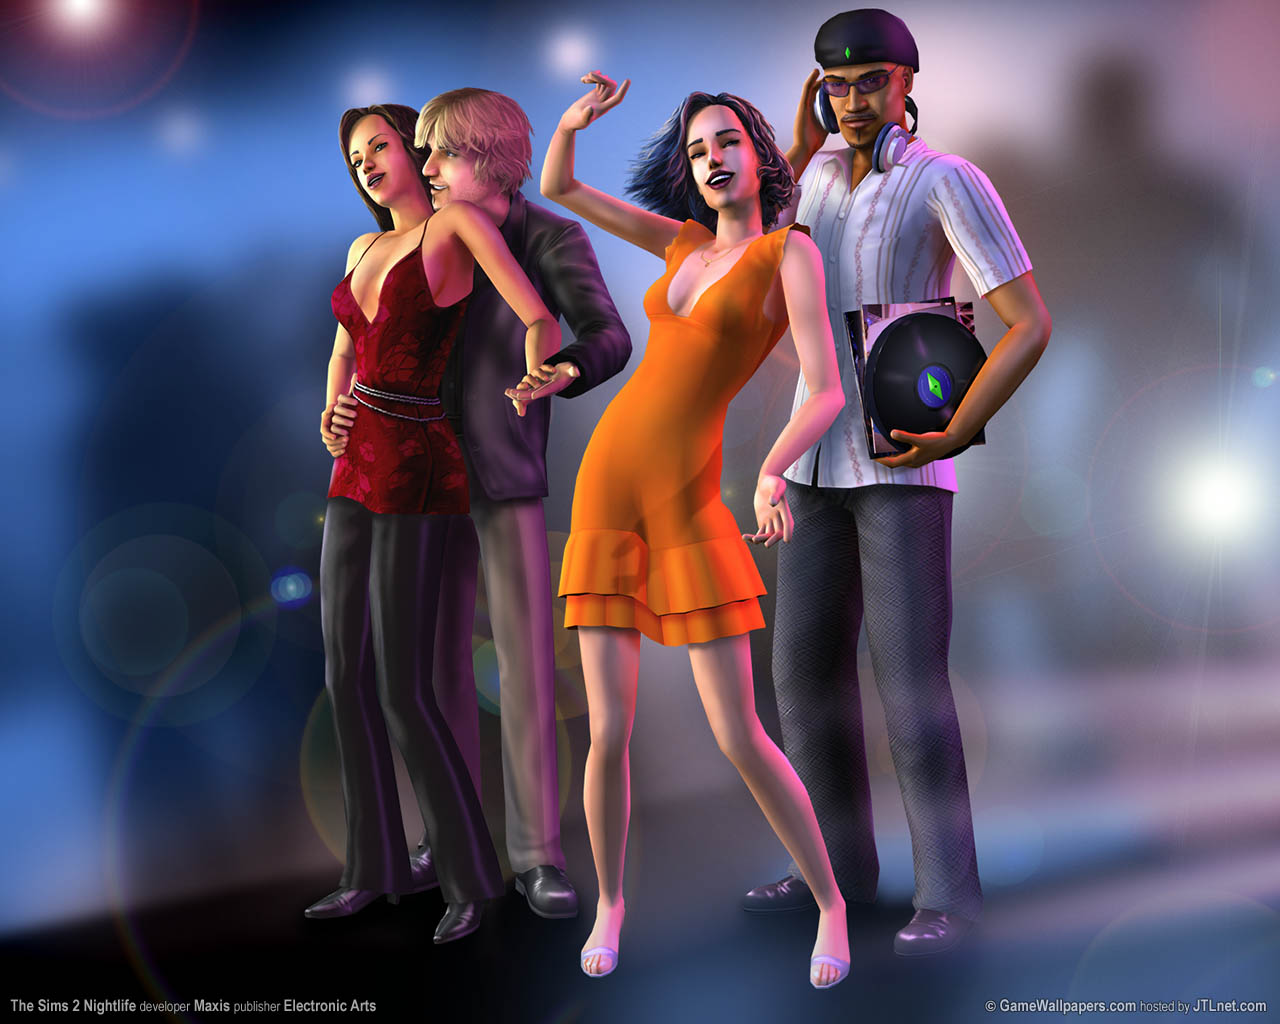 The Sims 2 Nightlife wallpaper 05 1280x1024